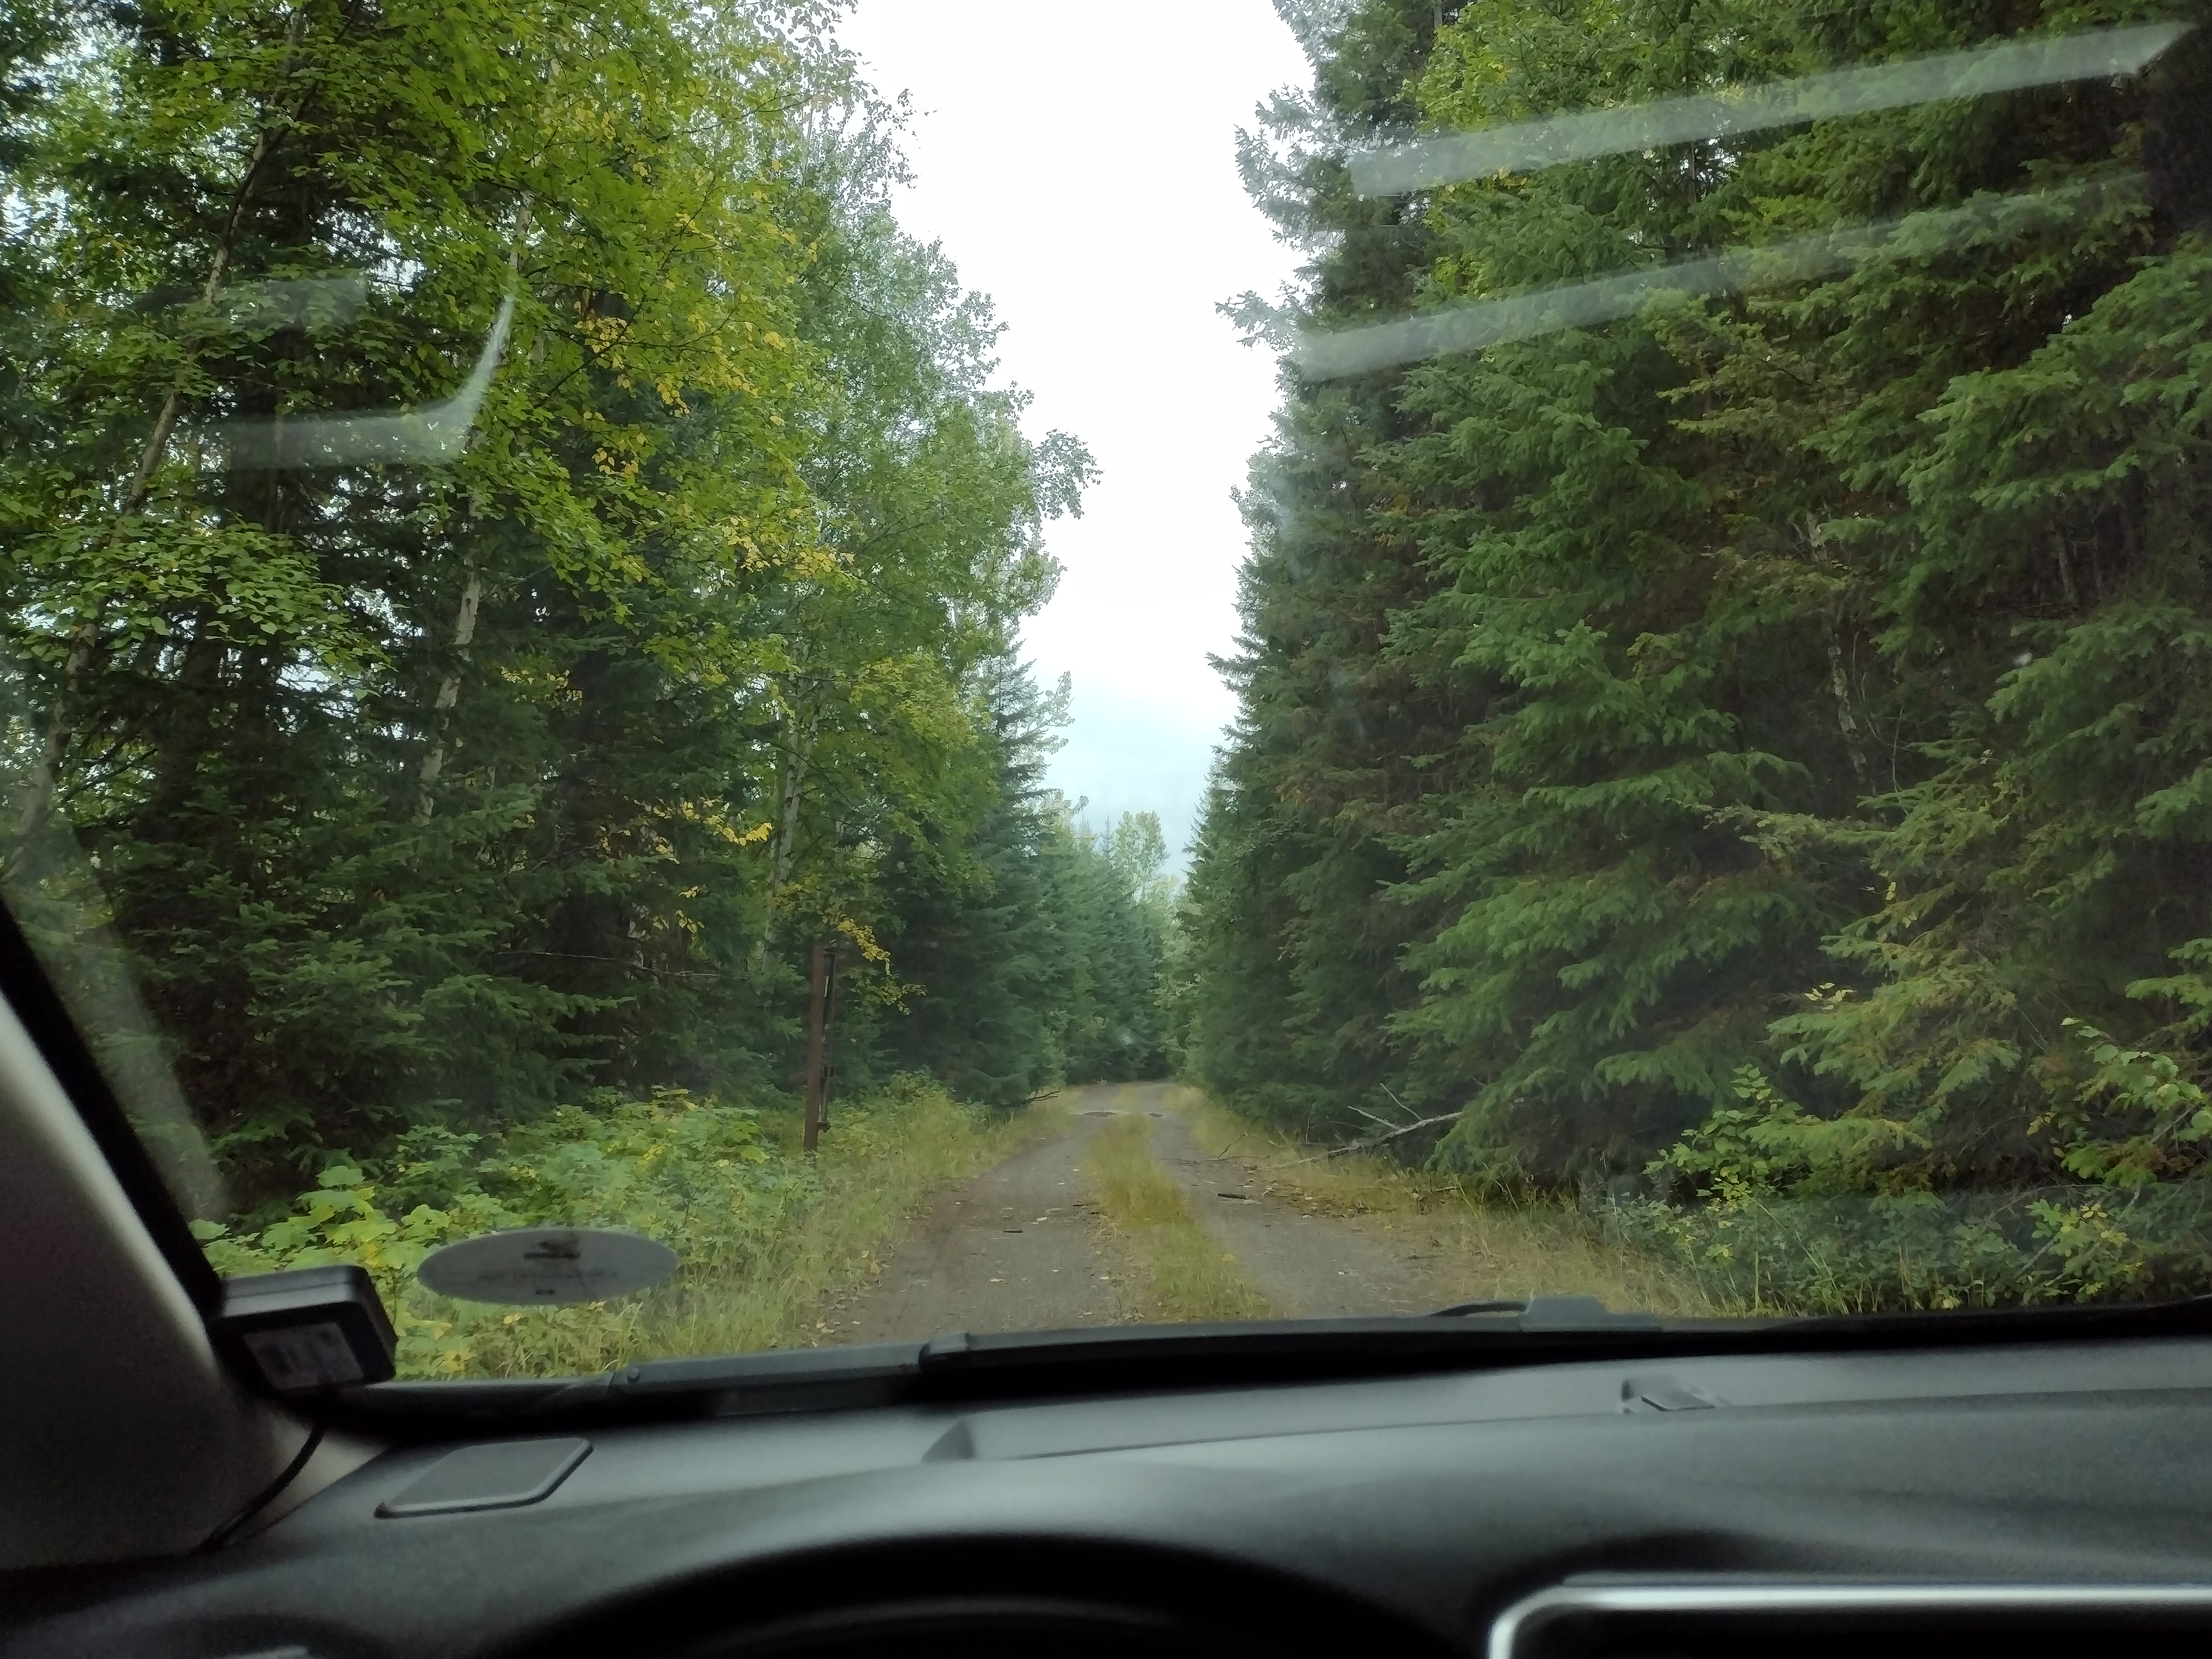 View from inside the car of a two-track road with forest on both sides. The two tracks for tires are gravelly and grey, and there's a green lane in the middle of weeds.
